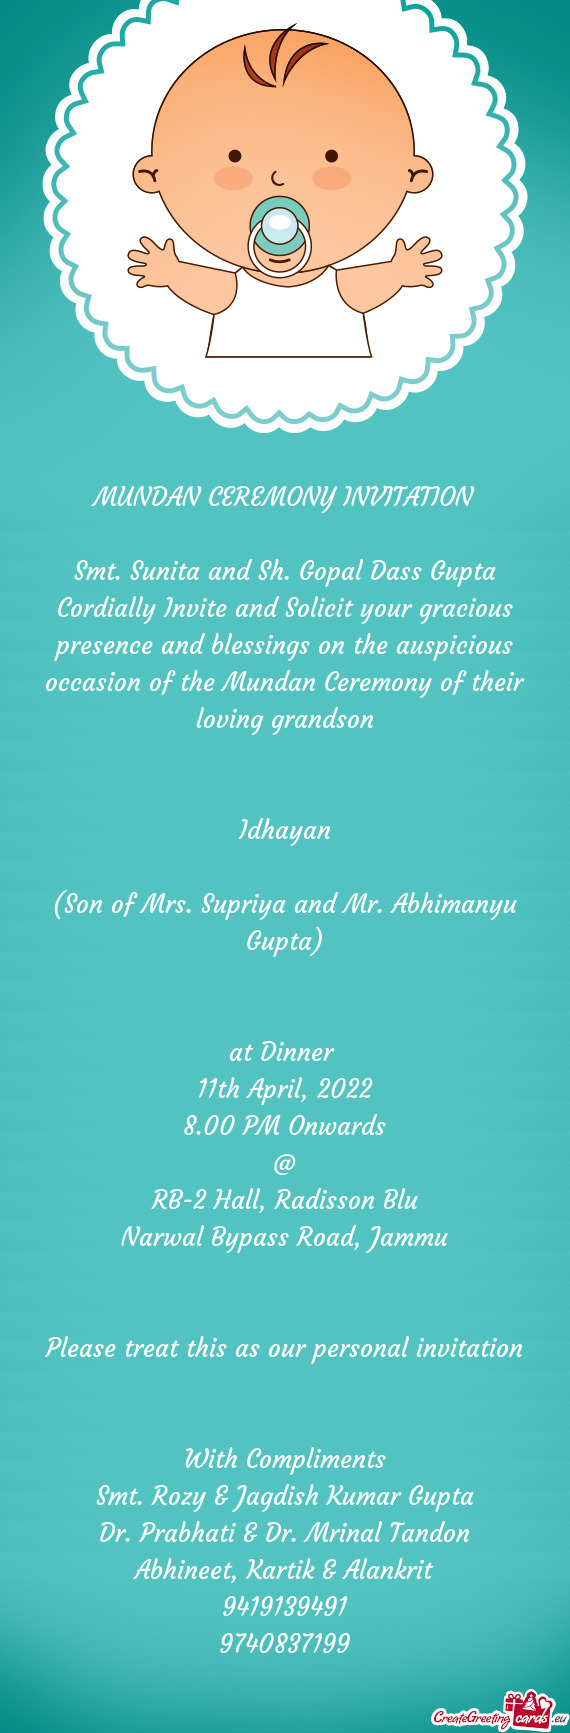 Cordially Invite and Solicit your gracious presence and blessings on the auspicious occasion of the